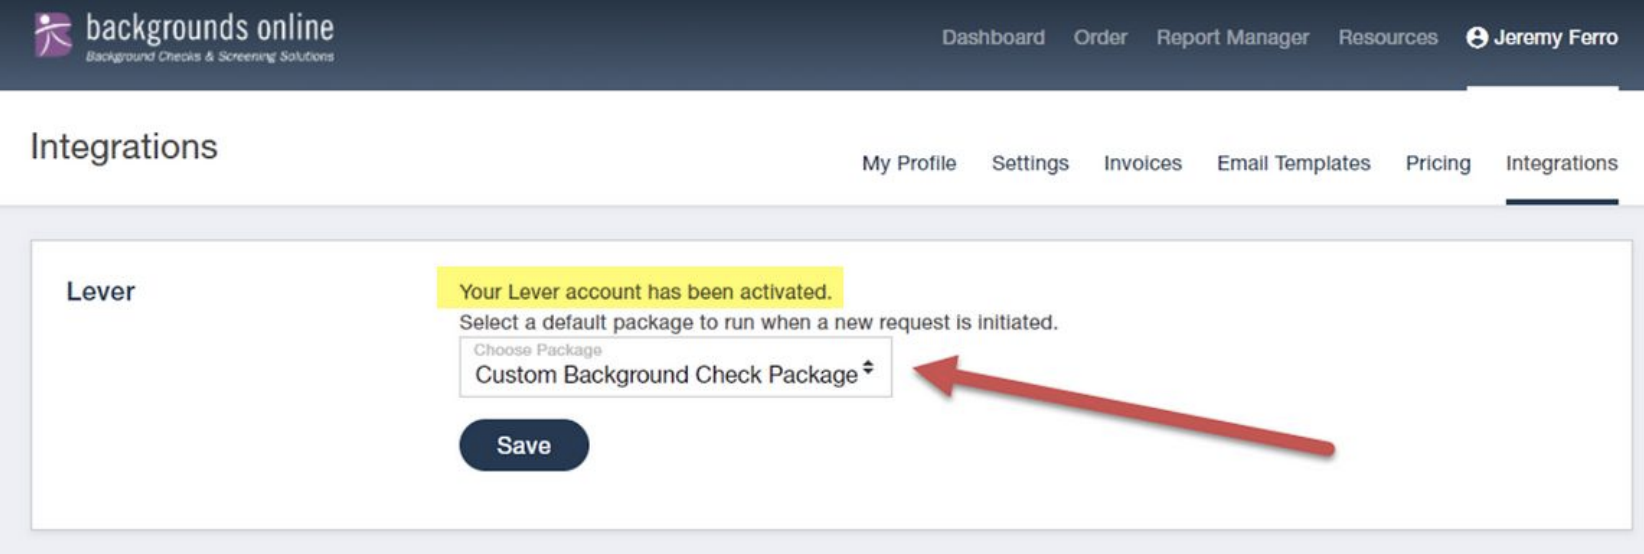 Backgrounds online dashboard with lever pointing to custom background check package in package selector